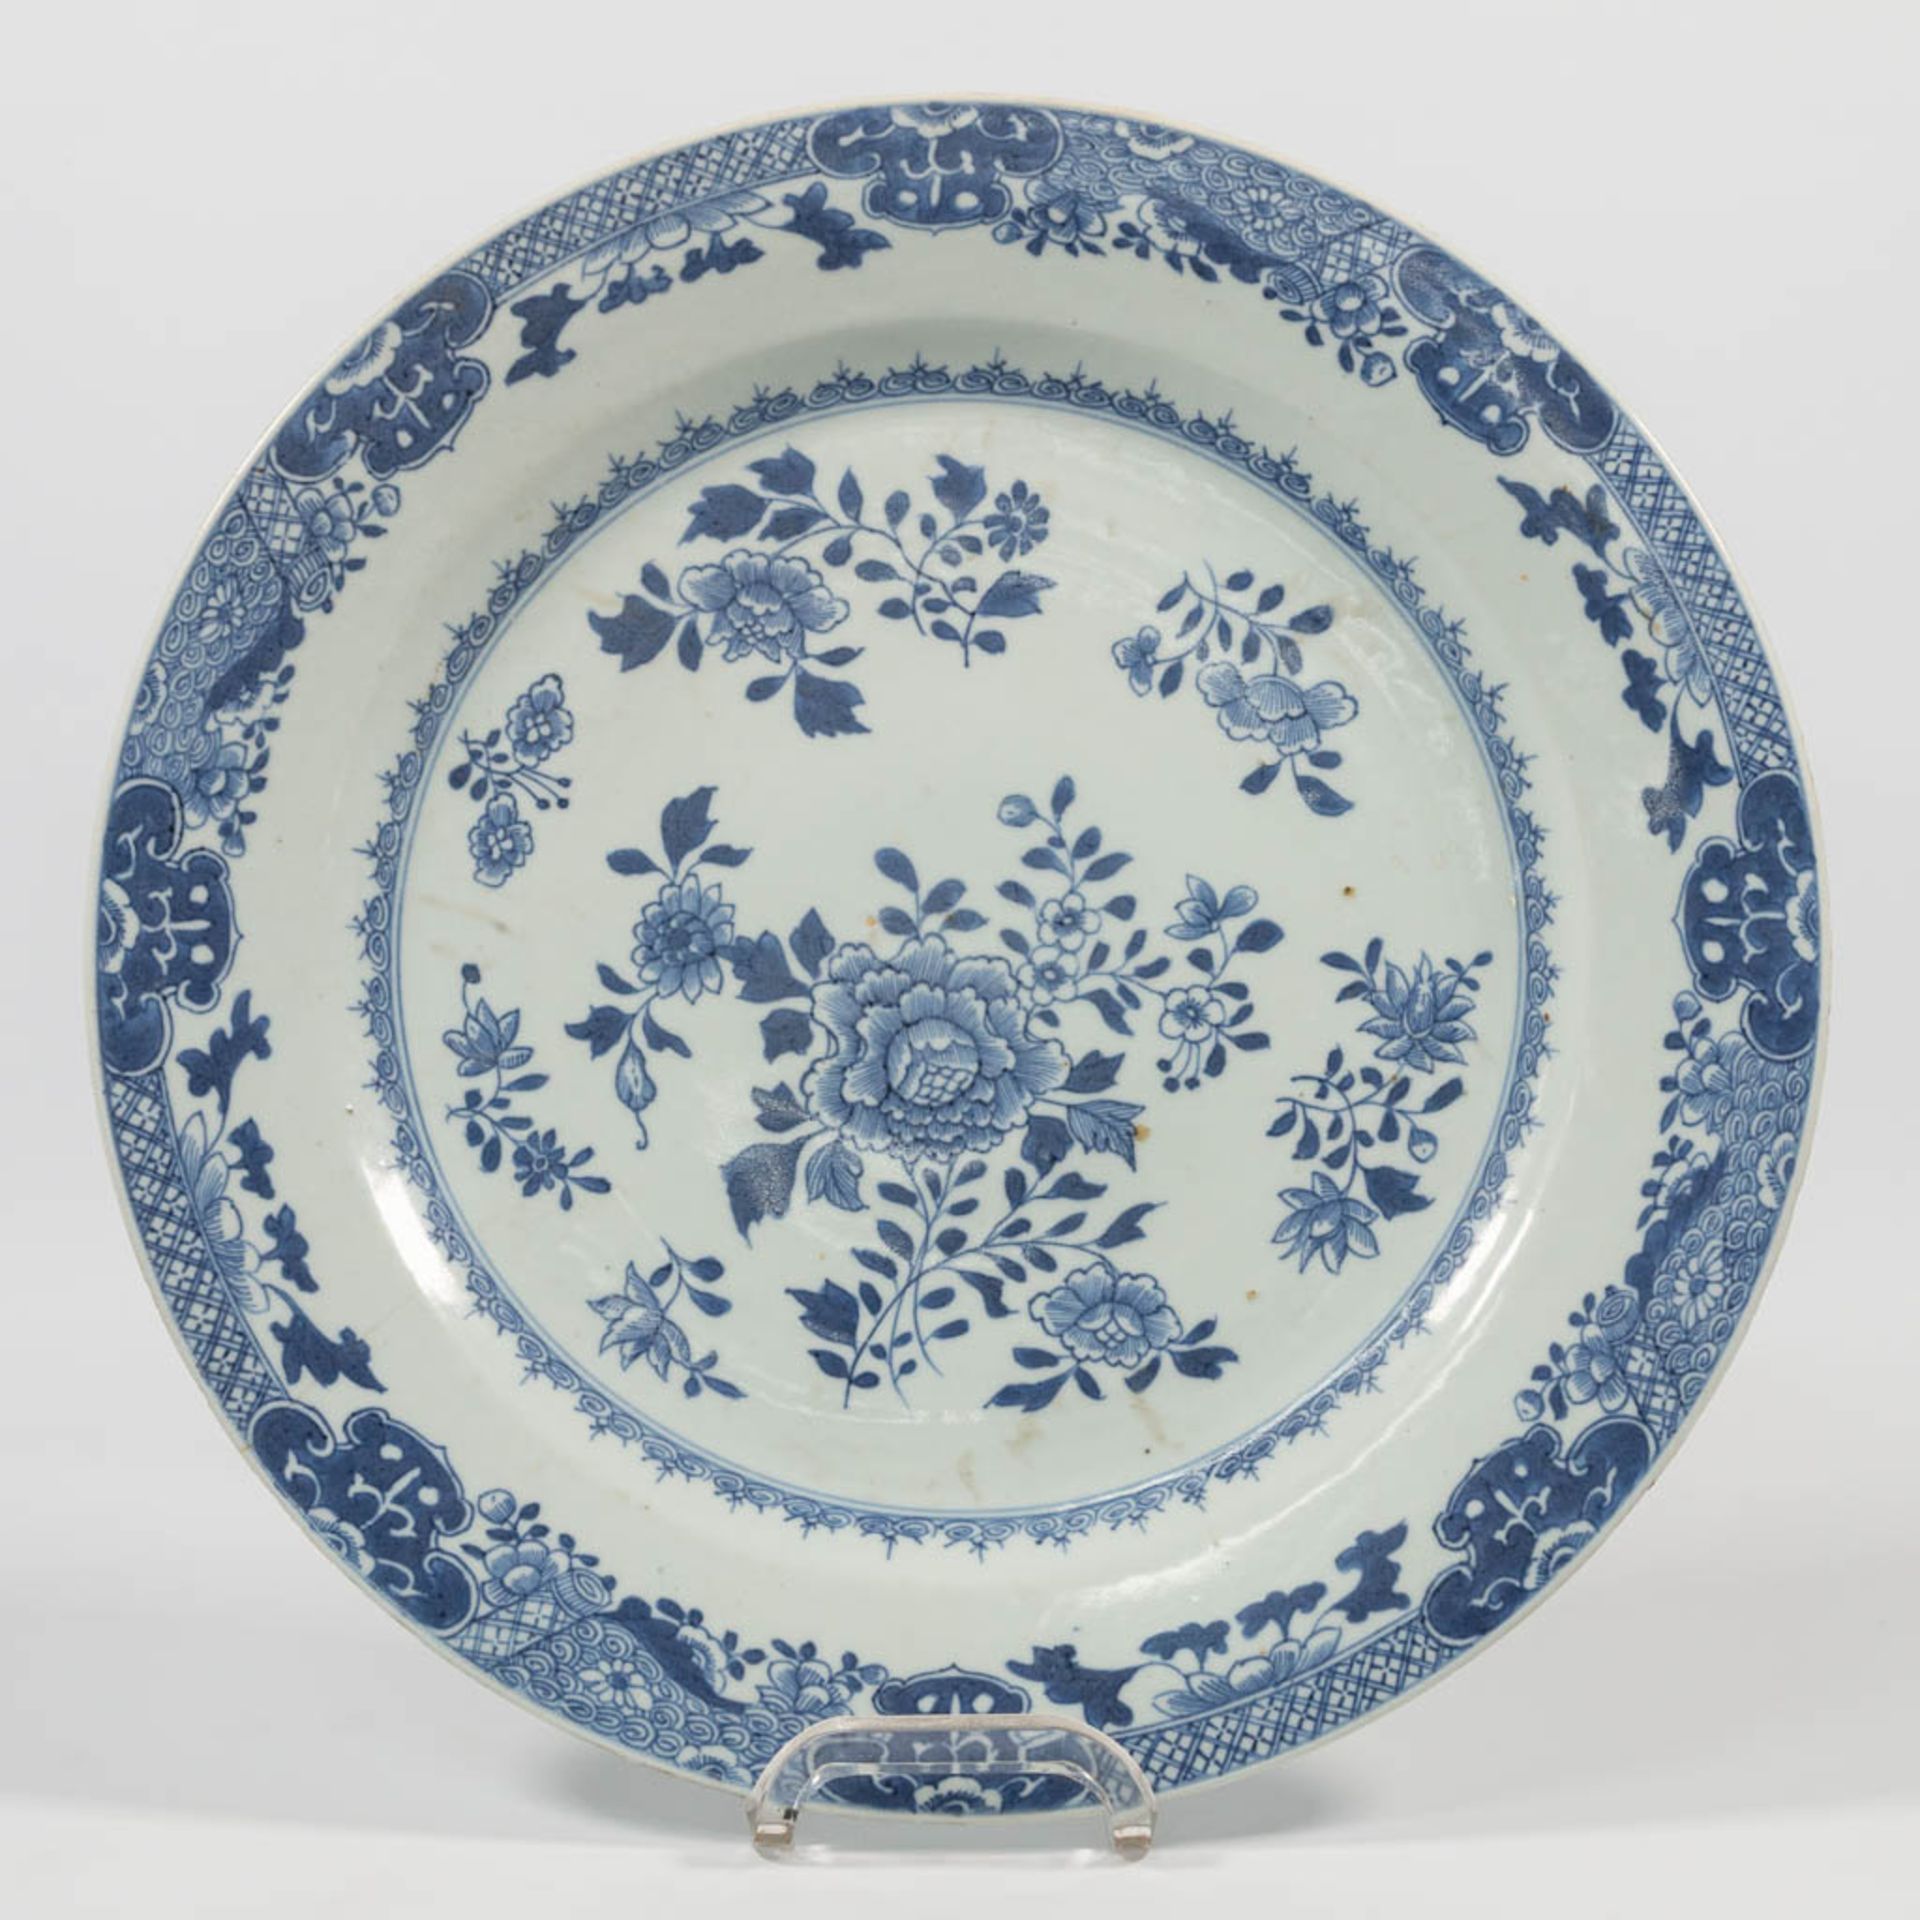 A blue and white Chinese Vase with symbolic decor, combined with 2 blue and white porcelain plates. - Image 26 of 33